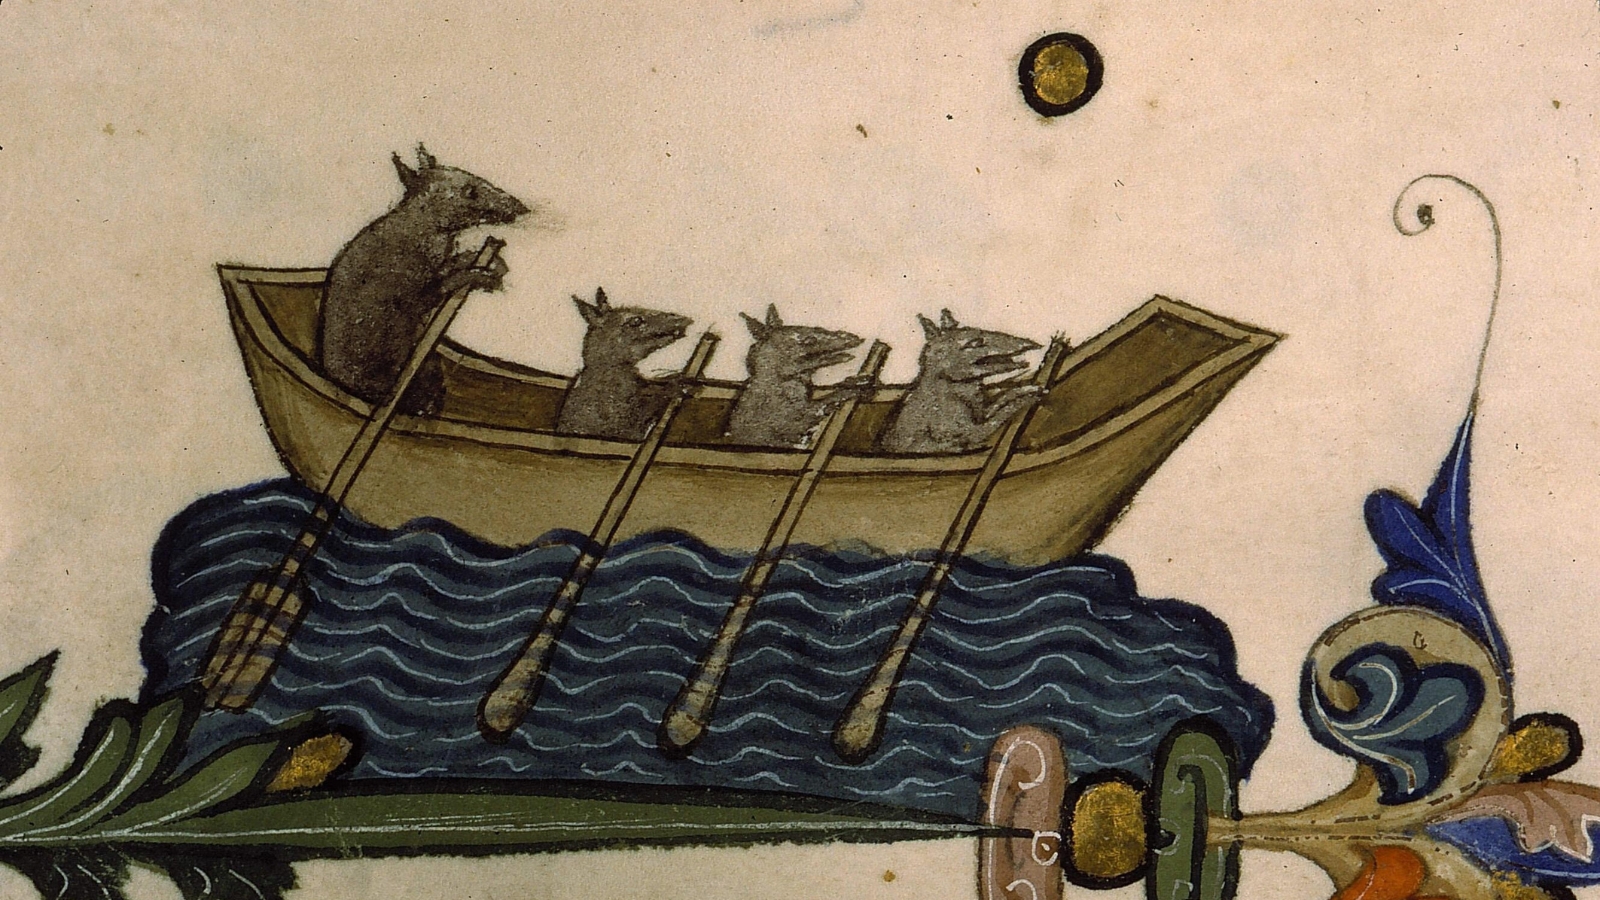 Detail of medieval illustrated manuscript marginalia of four rats holding oars in an open wooden boat resting on water on top of some page ornamentation.